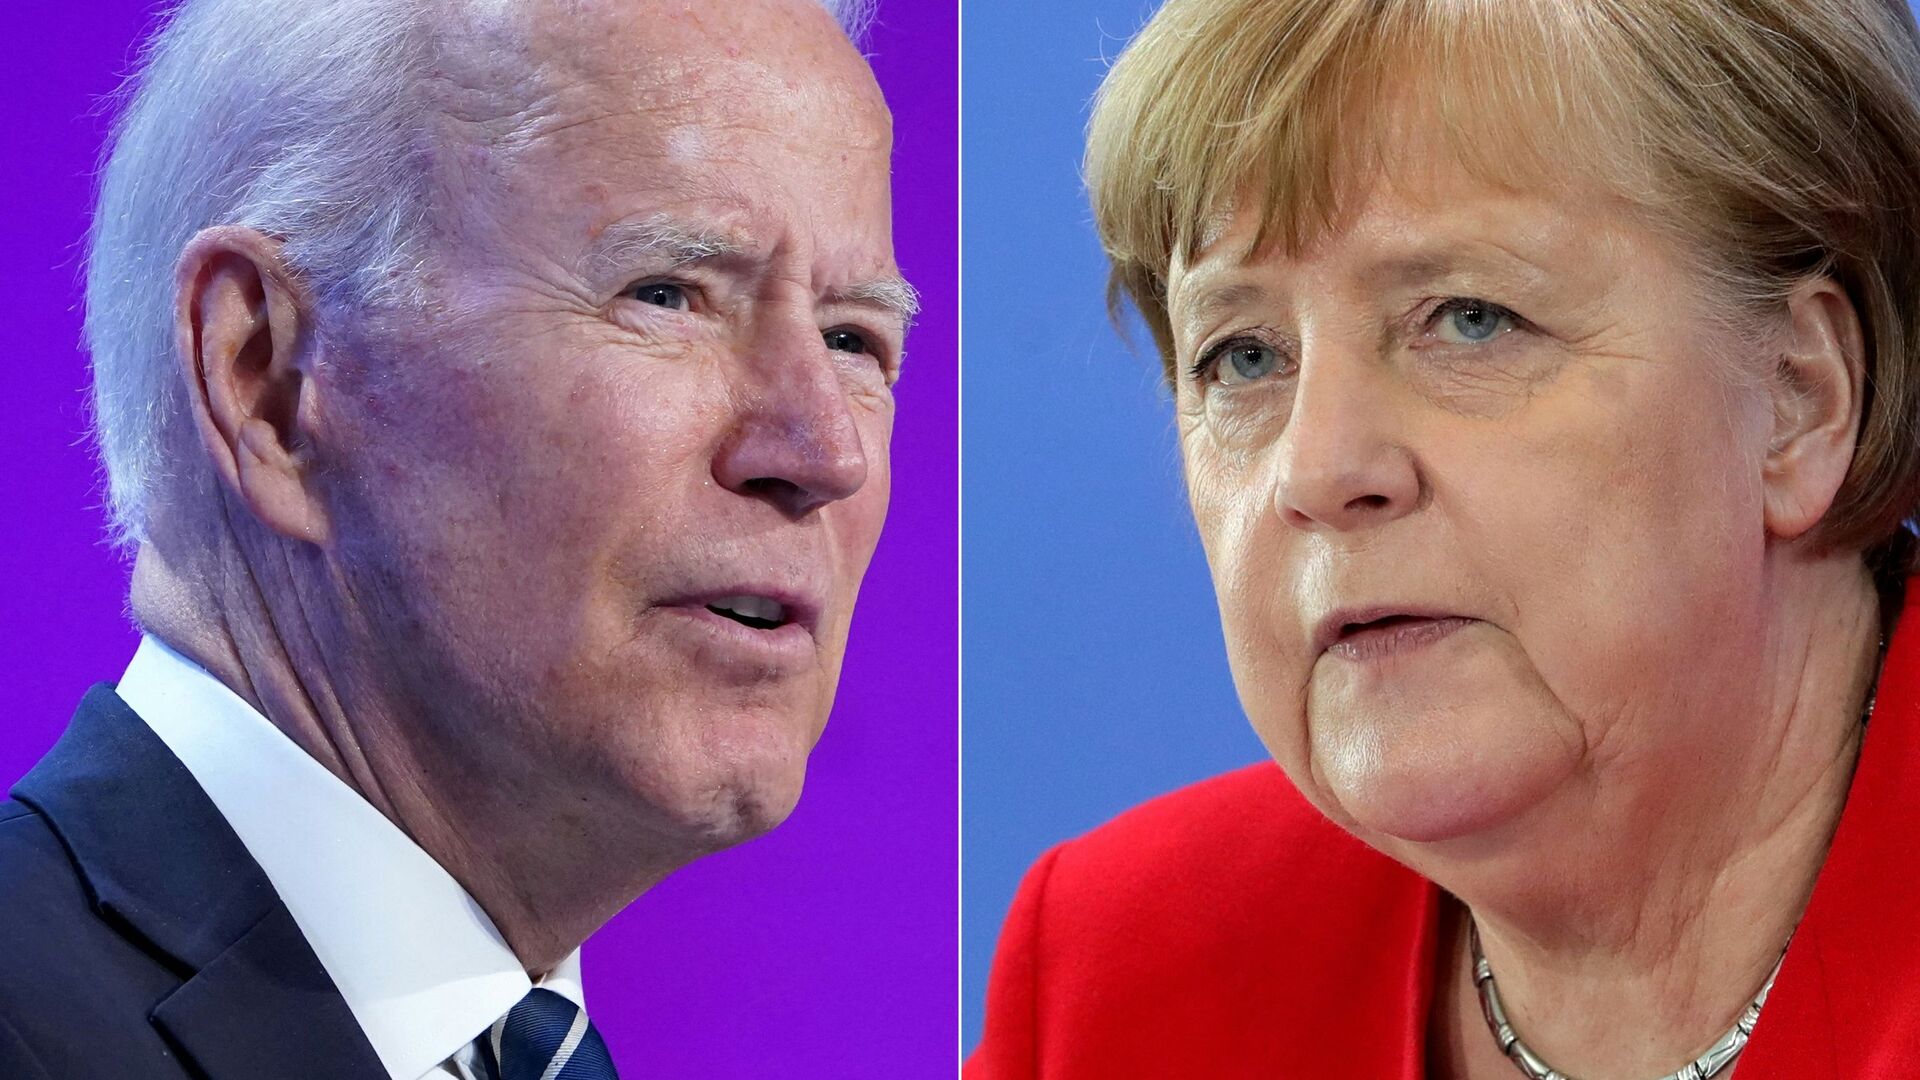 This combination of pictures created on July 14, 2021 shows US President Joe Biden in Washington, DC on July 2, 2021 and German Chancellor Angela Merkel in Berlin on May 6, 2020. - US President Joe Biden will participate in a bilateral meeting with Dr. Angela Merkel, Chancellor of the Federal Republic of Germany on July 15 in Washington DC, this visit will affirm the deep and enduring bilateral ties between the United States and Germany. - Sputnik 日本, 1920, 31.10.2021